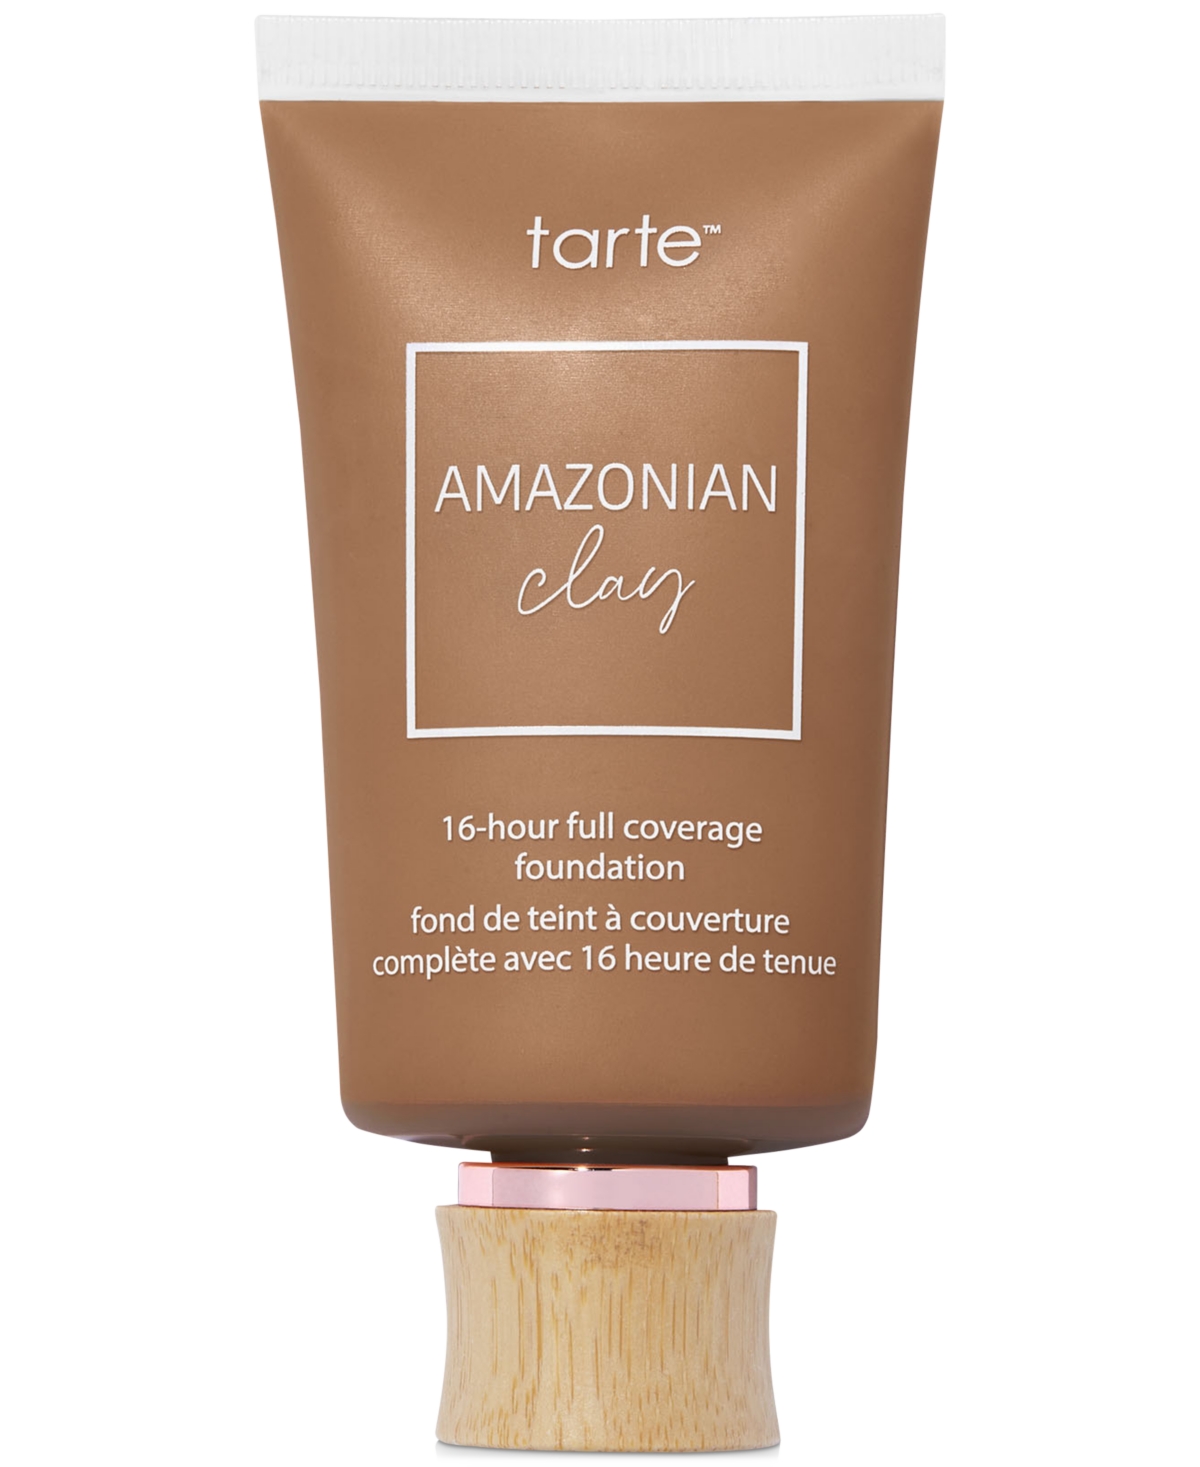 Tarte Amazonian Clay 16-hour Full Coverage Foundation In G Deepgolden - Deep Skin With Very Warm